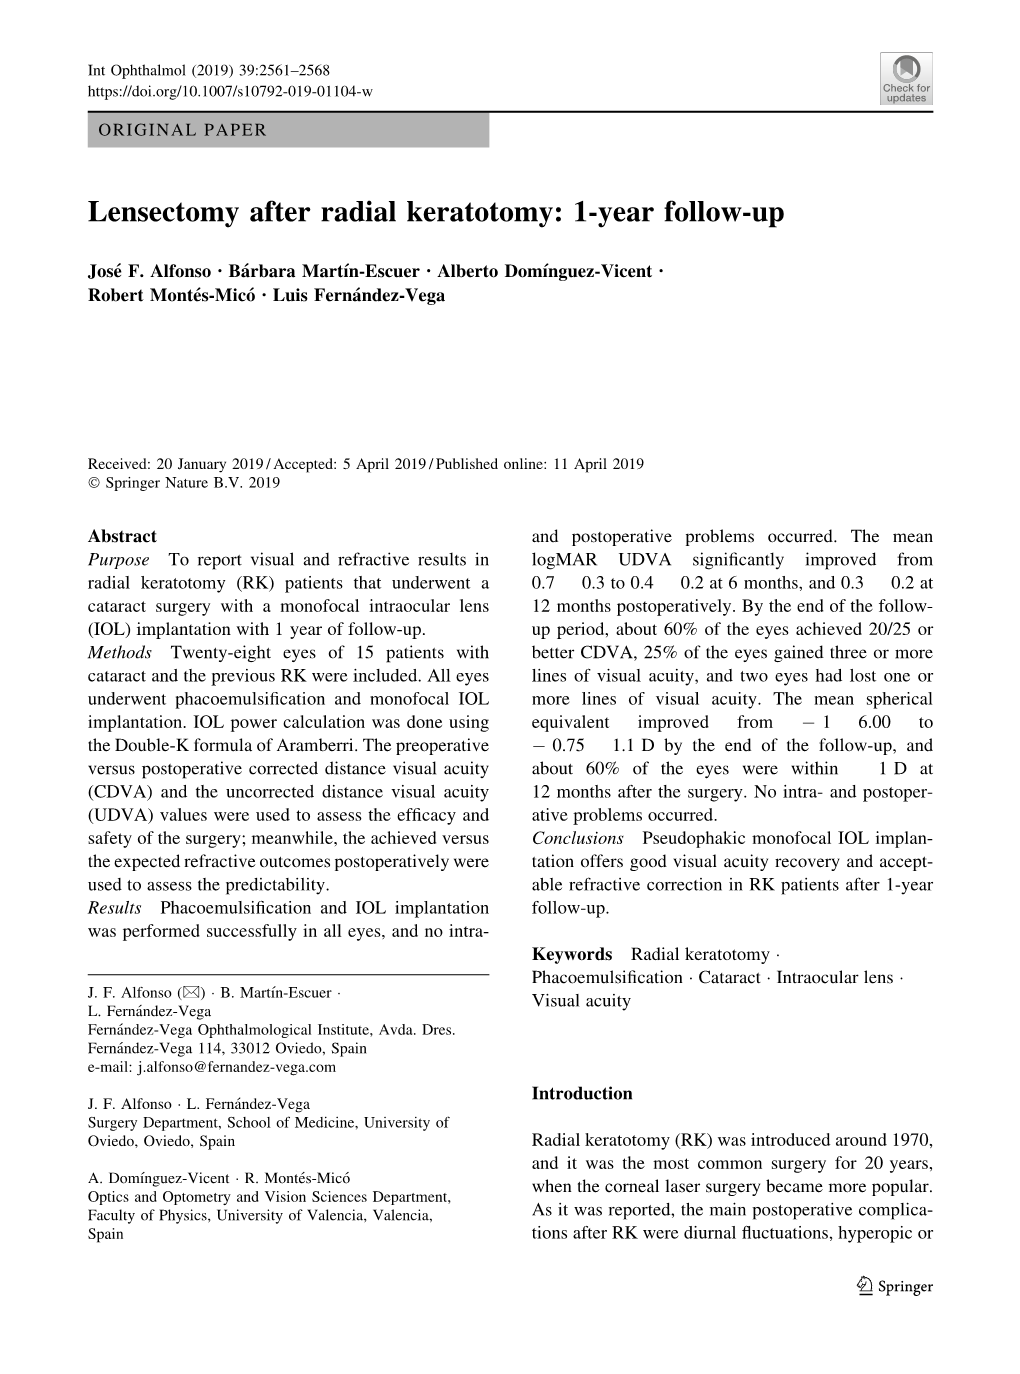 Lensectomy After Radial Keratotomy: 1-Year Follow-Up